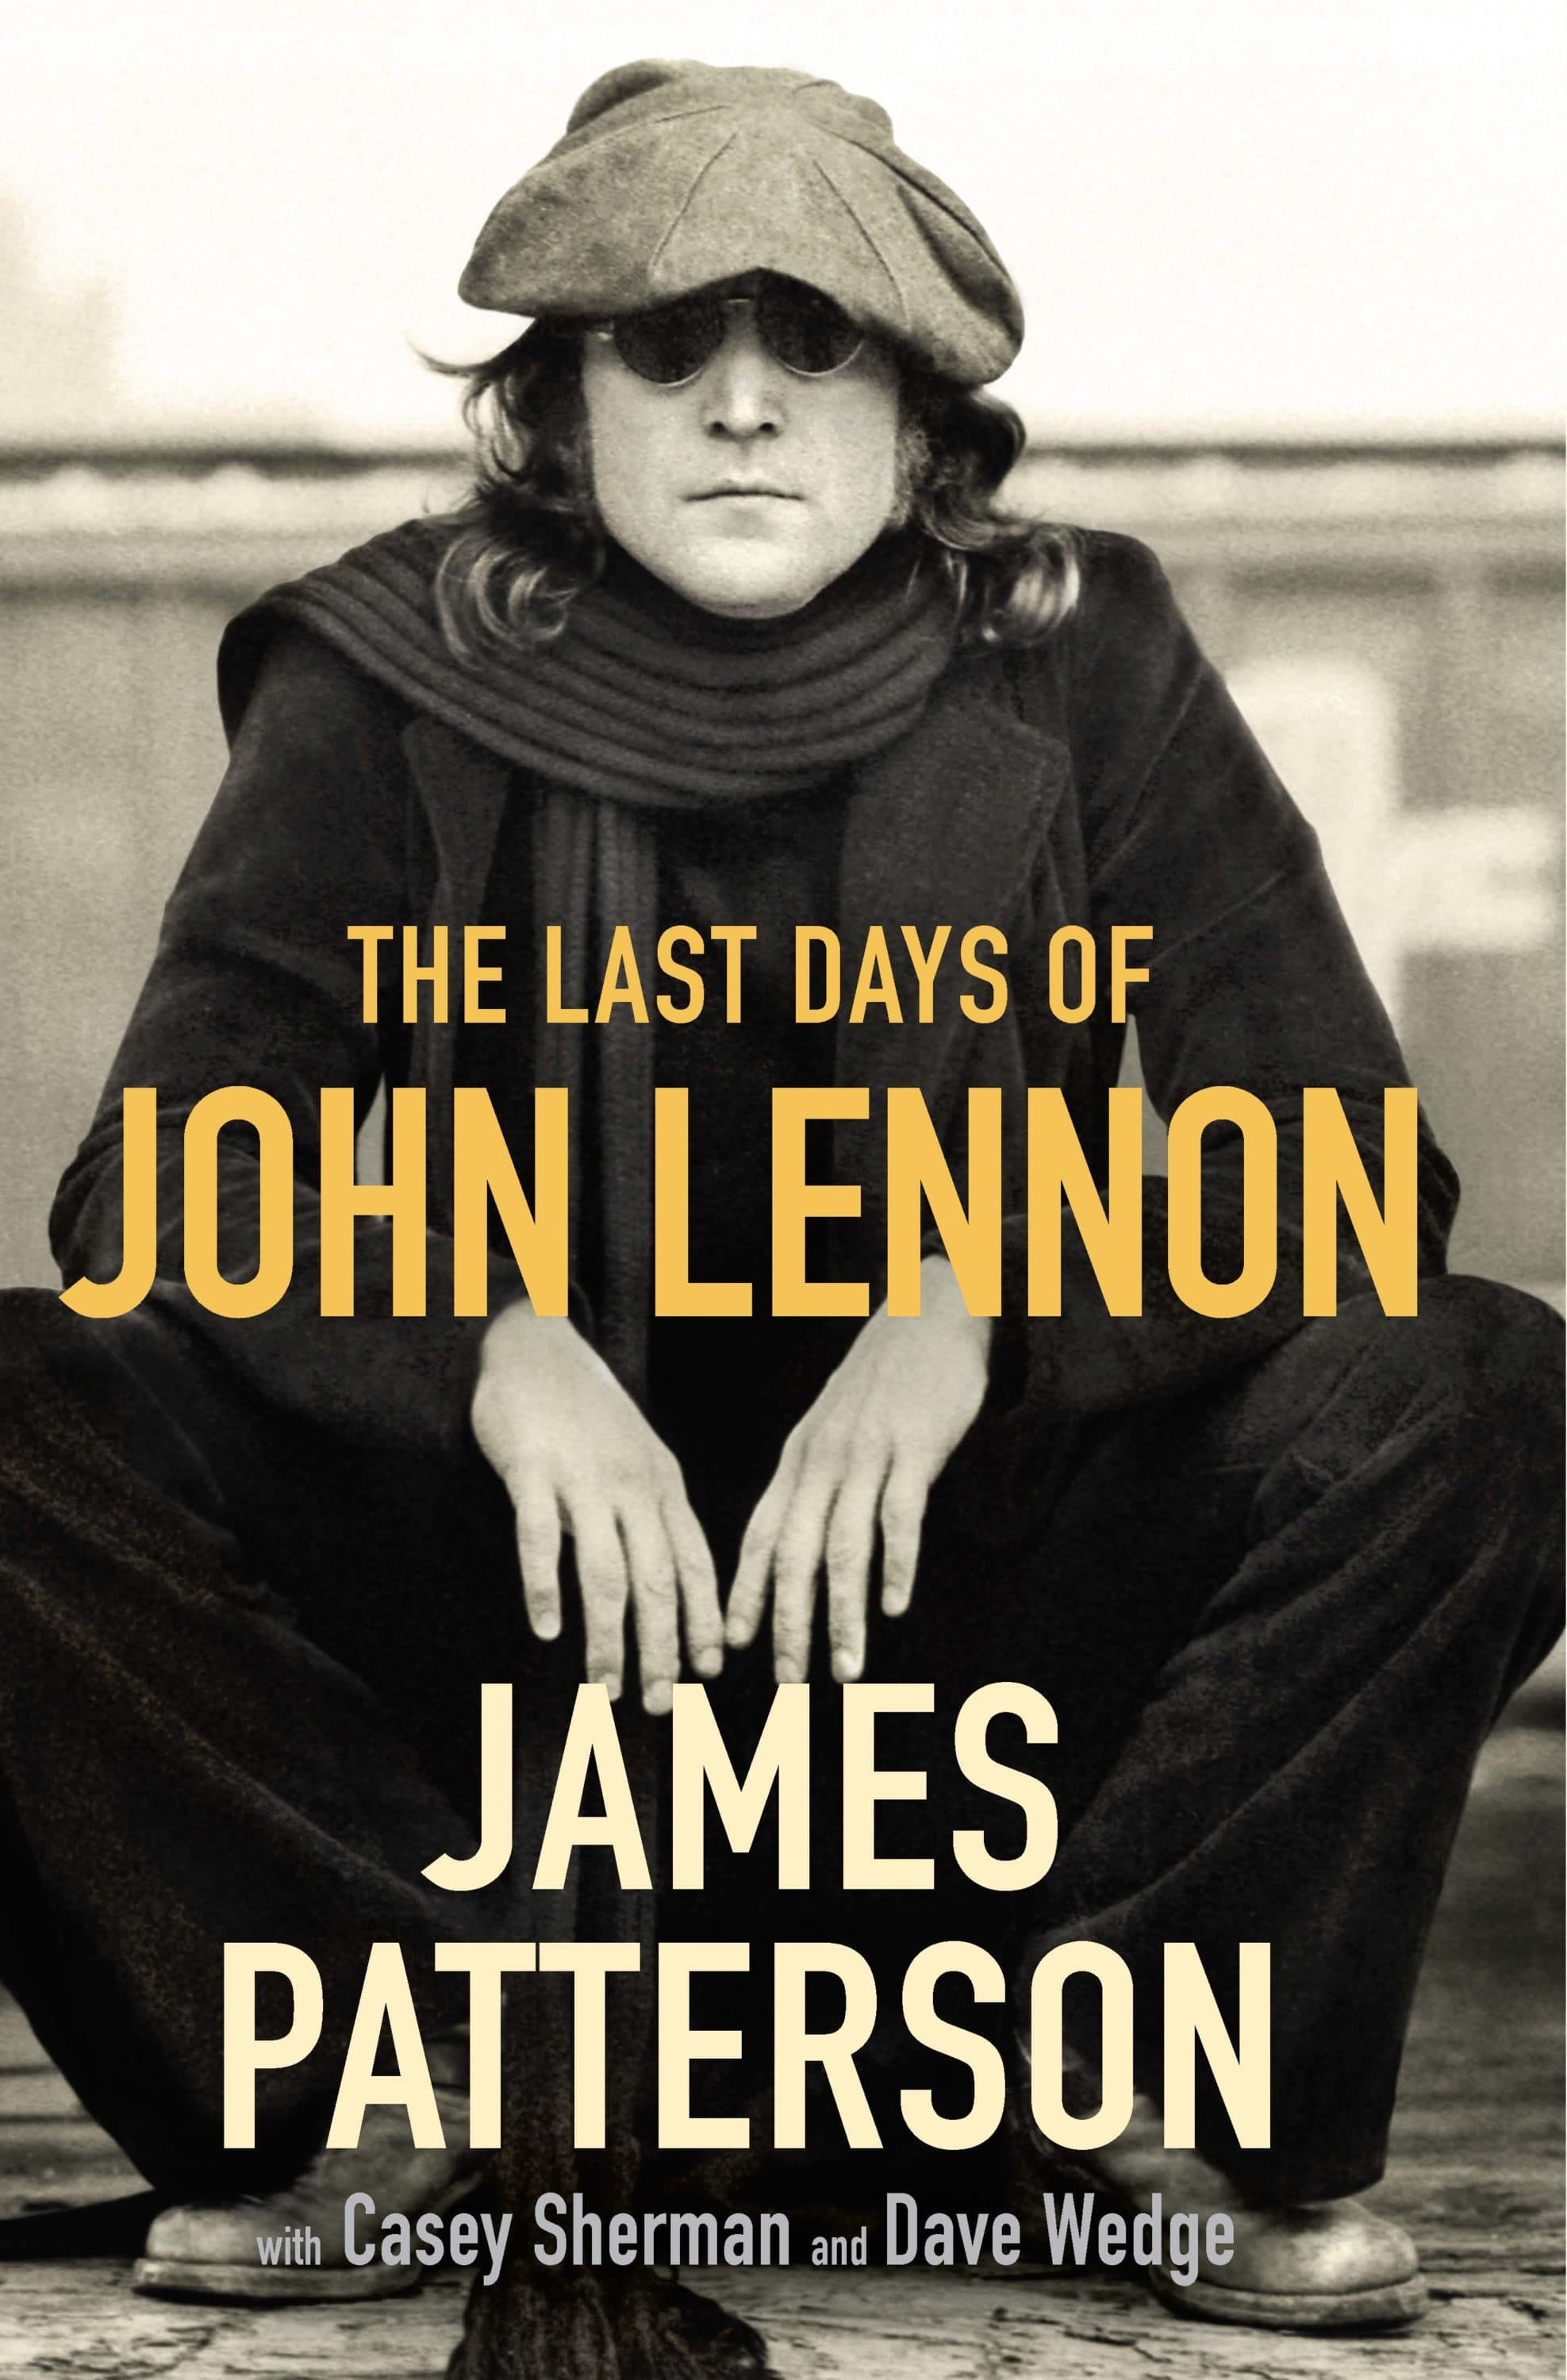 Author James Patterson Explores The Last Days Of John Lennon 40 Years After His Assassination The Artery